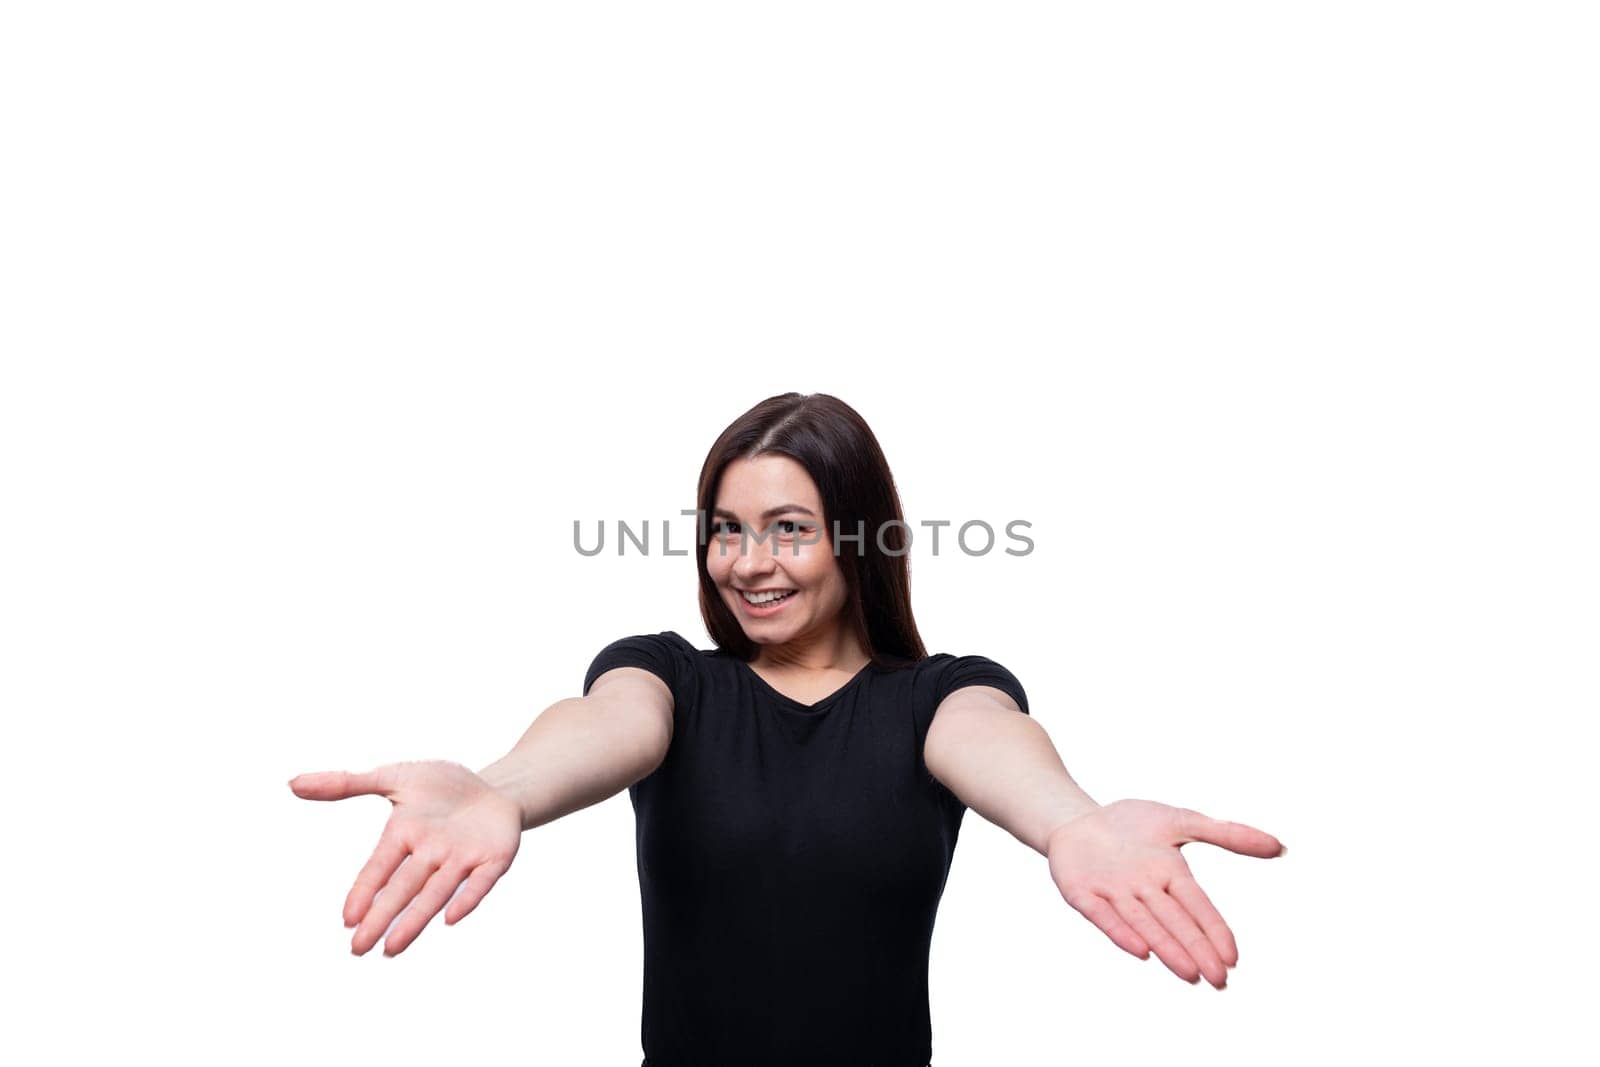 25 year old brunette woman with brown eyes greets and smiles against a background with copy space.